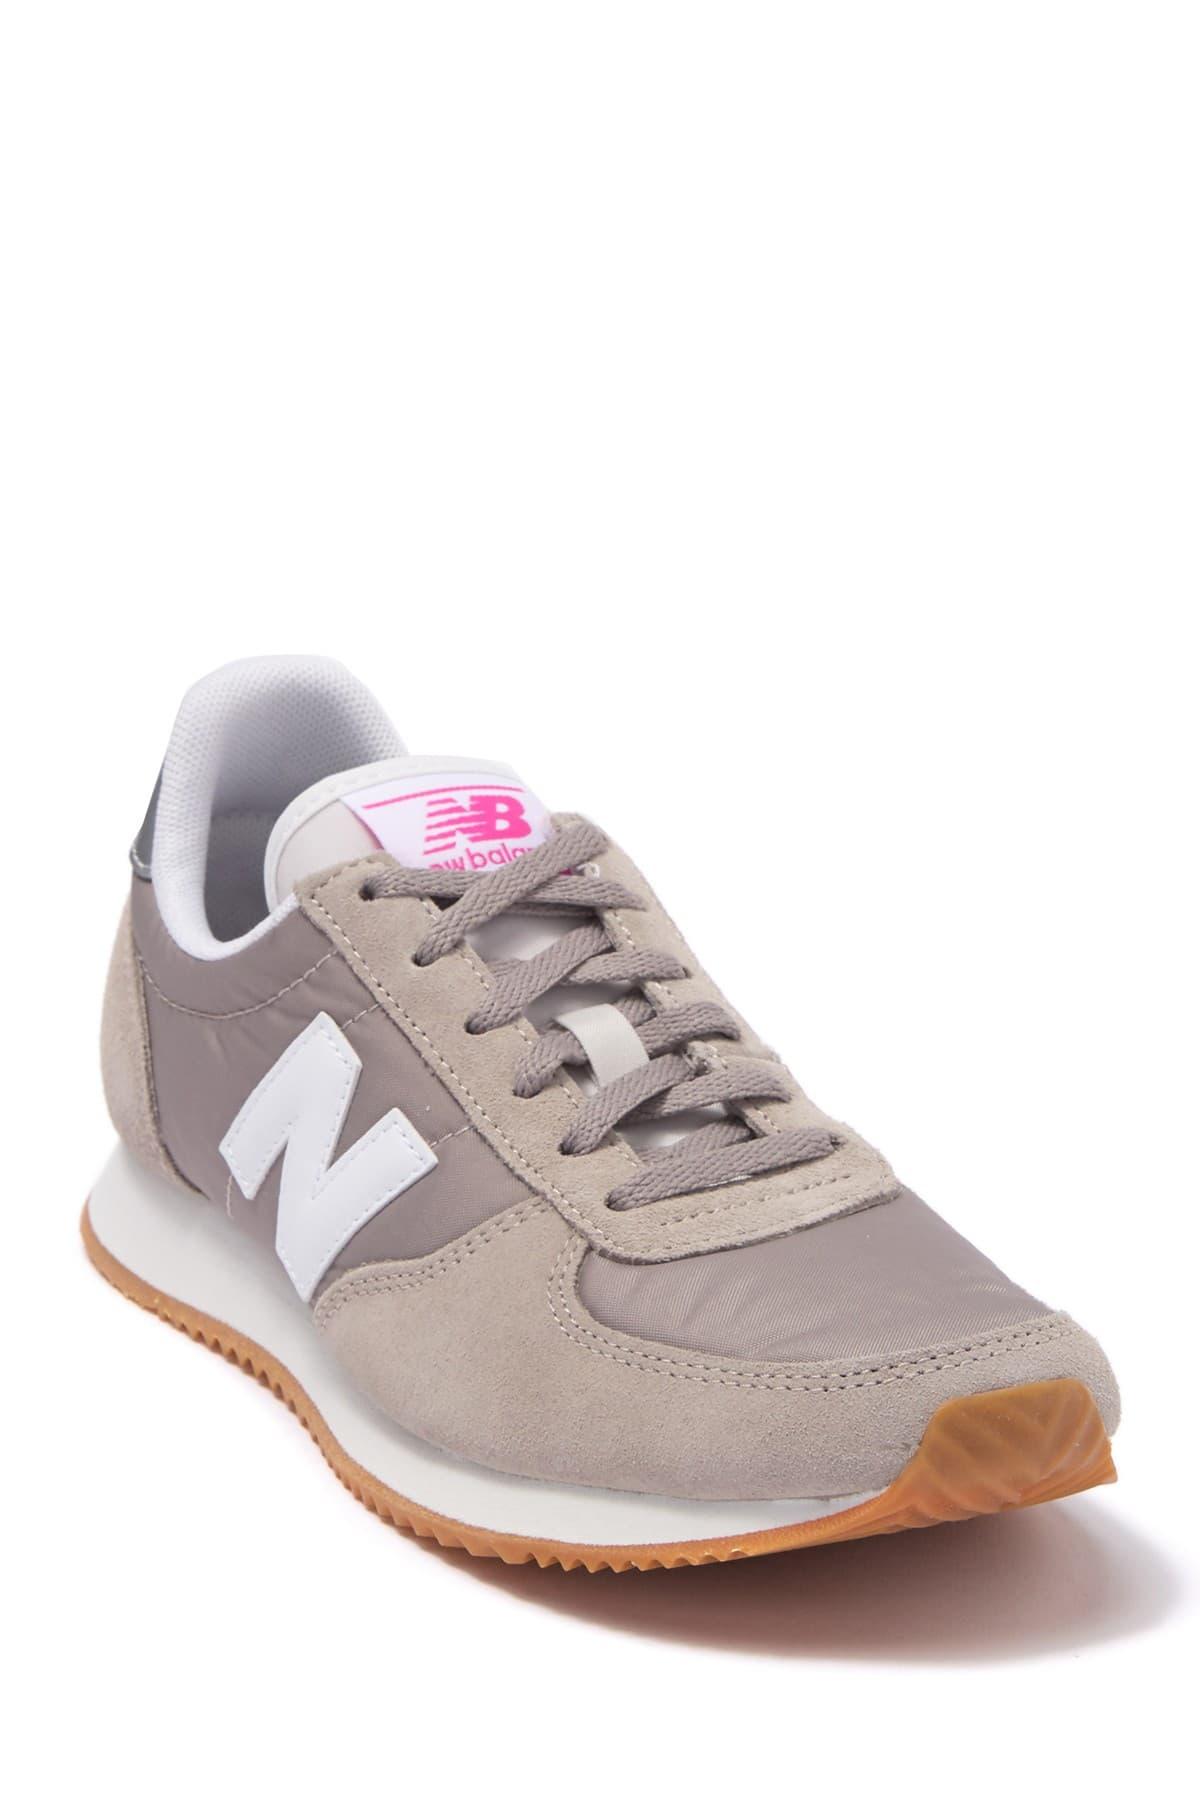 New Balance Synthetic 220 Classic V1 Sneaker in Grey/White (Gray ...